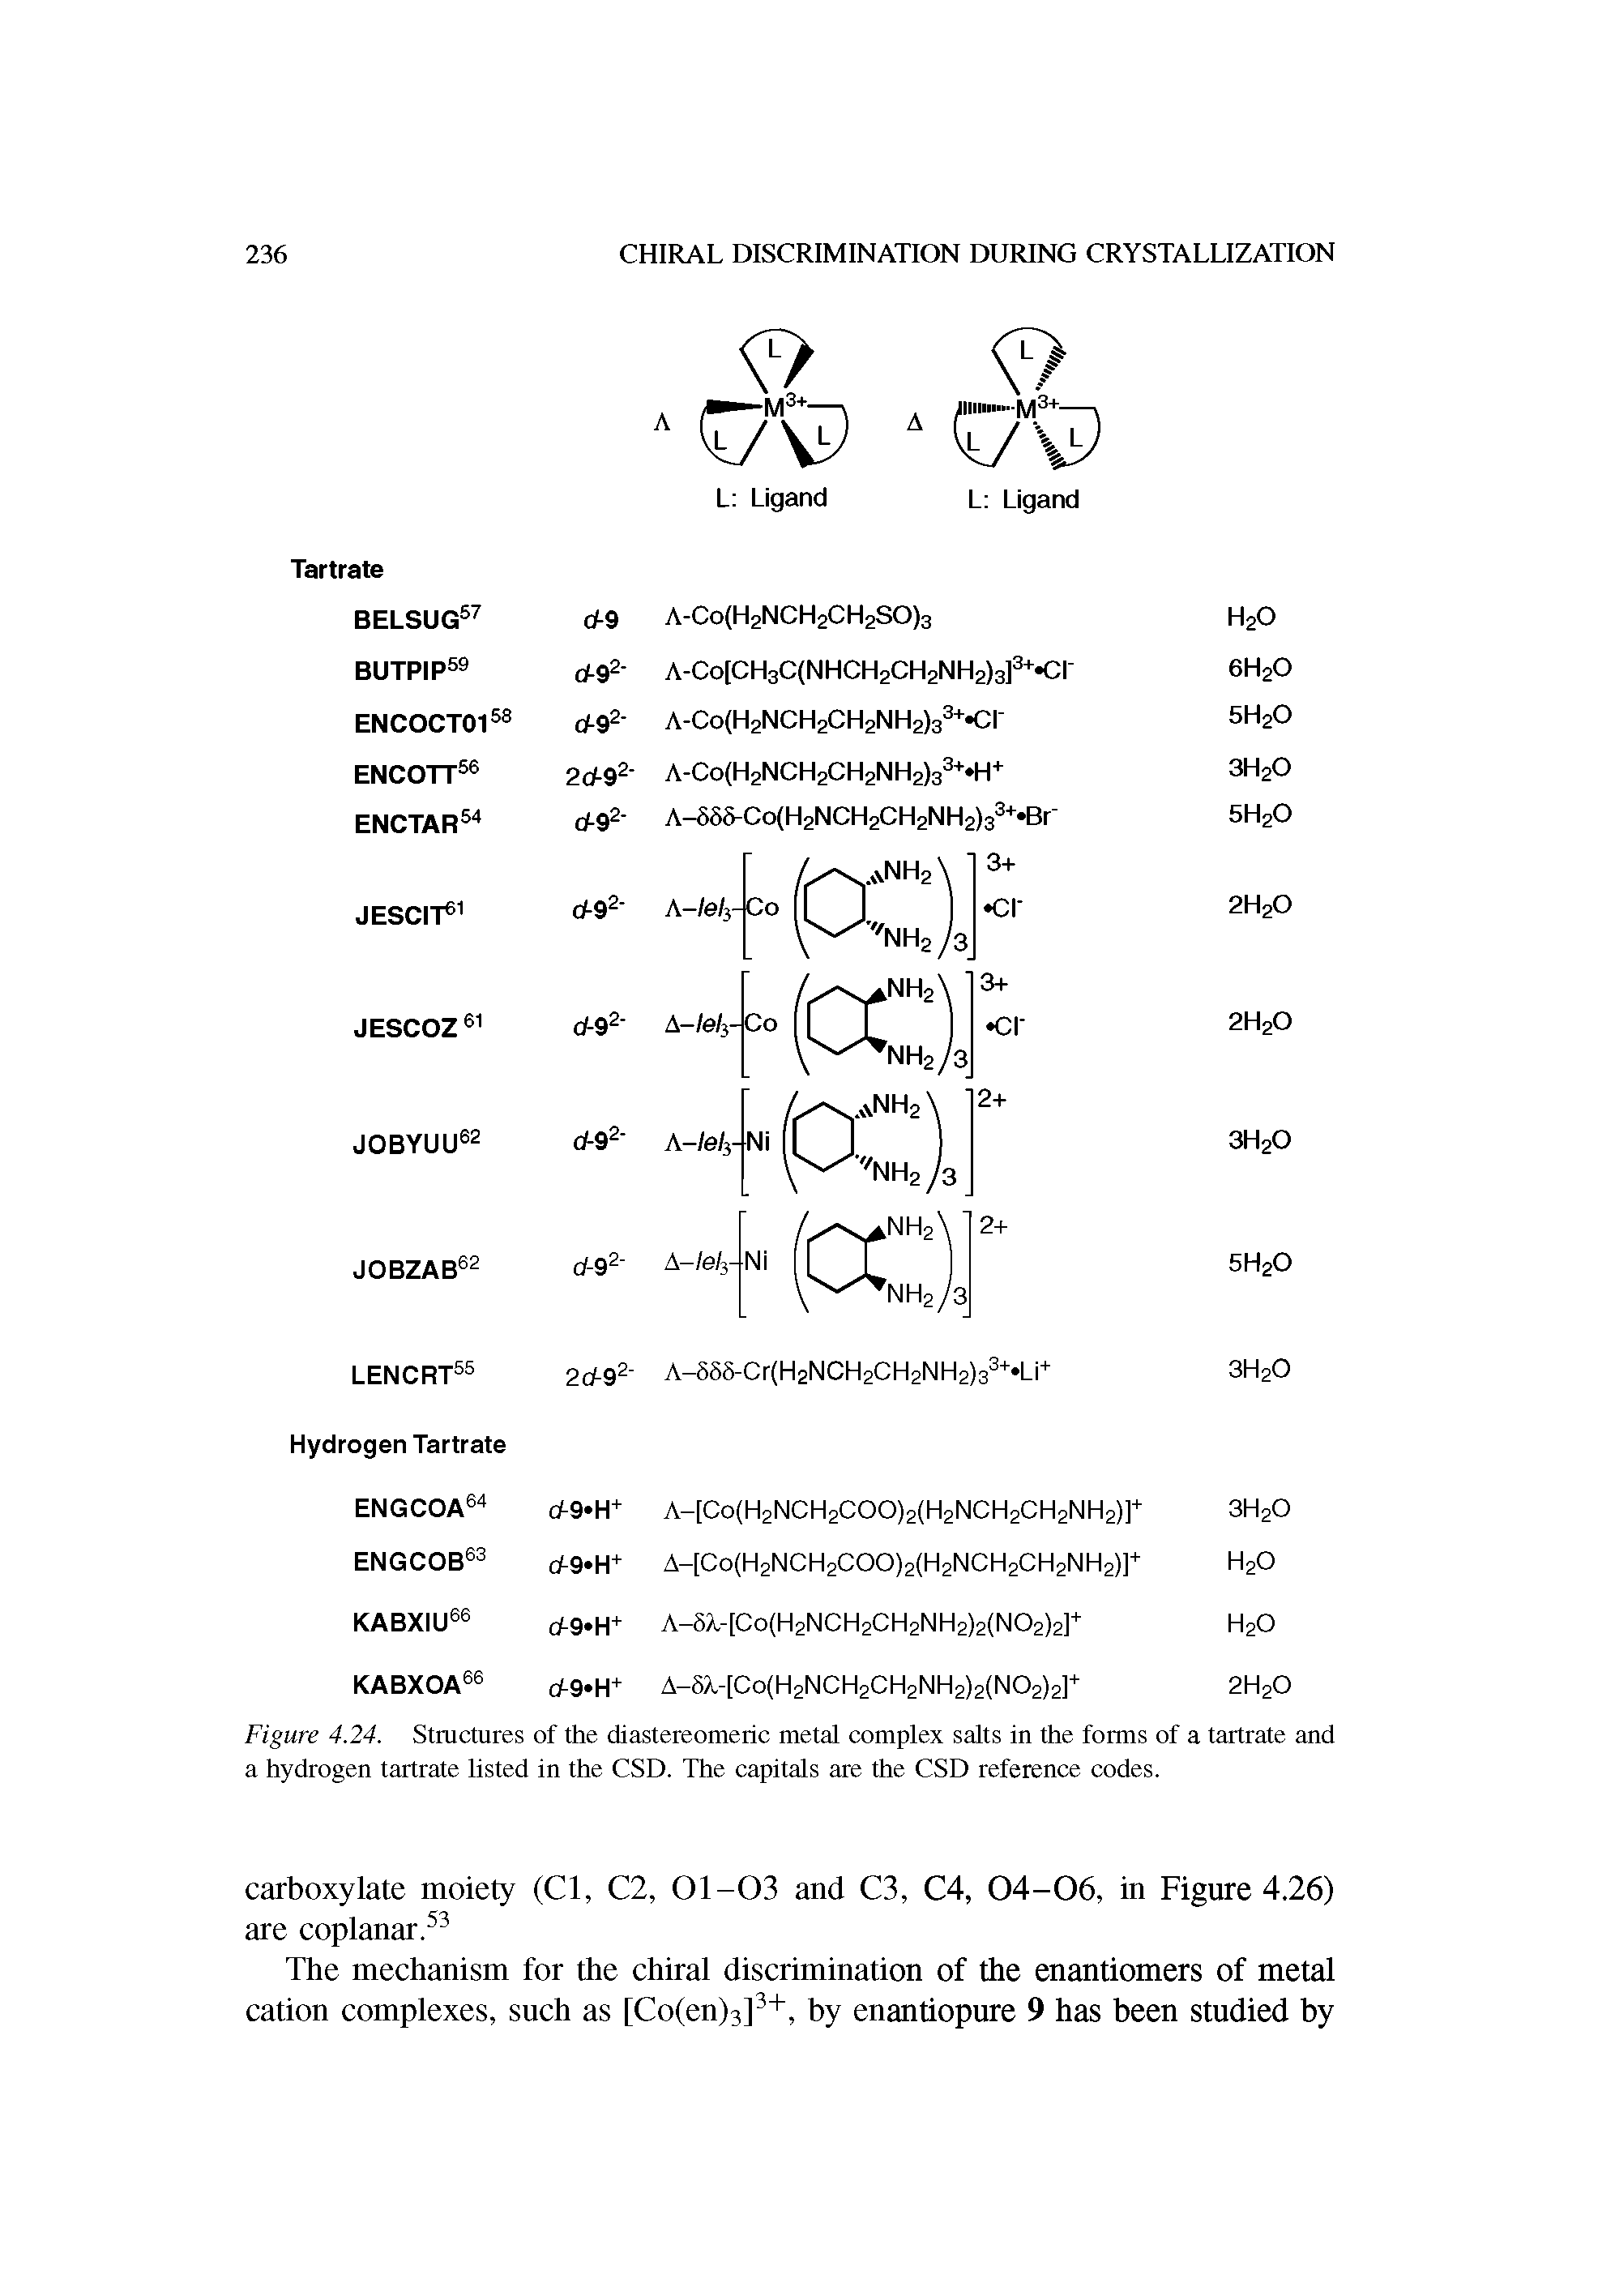 Figure 4.24. Structures of the diastereomeric metal complex salts in the forms of a tartrate and a hydrogen tartrate listed in the CSD. The capitals are the CSD reference codes.